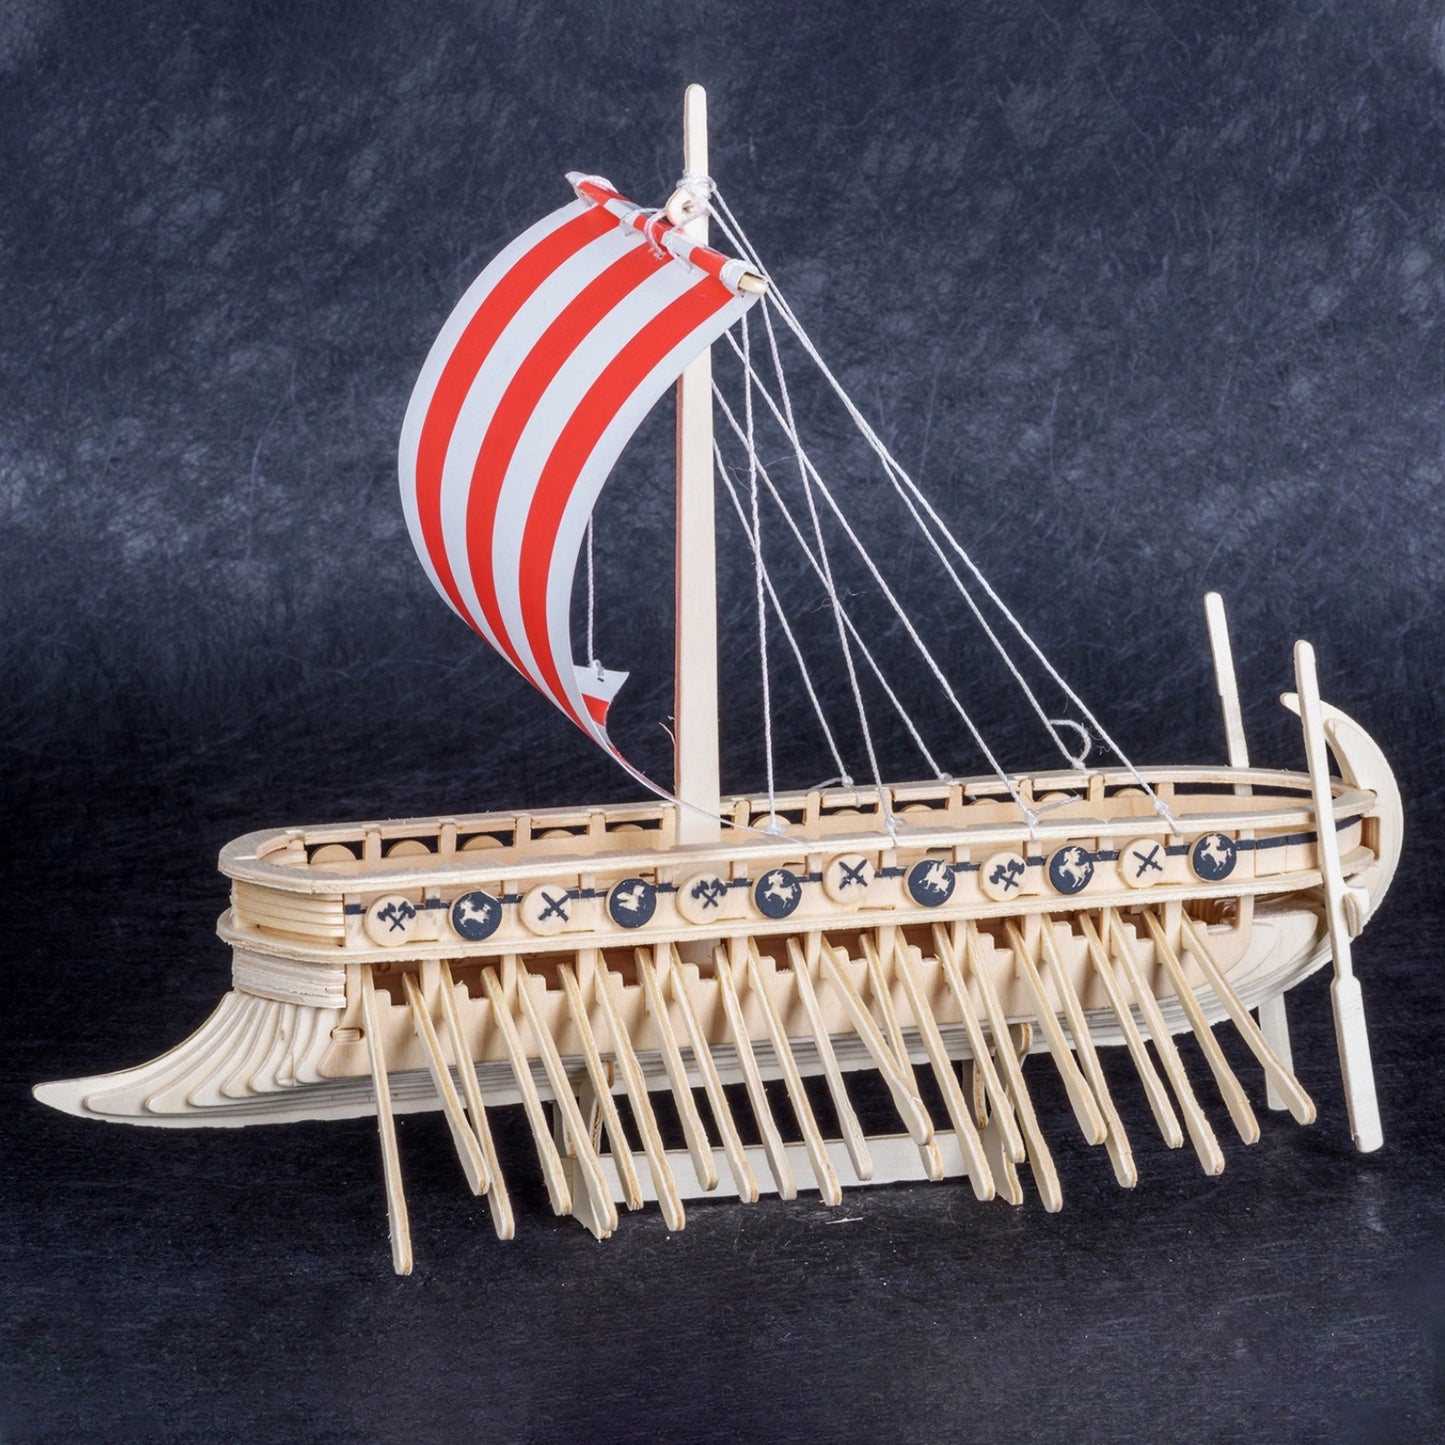 Side view of a miniature wooden Viking ship with a read and white sail, set against a dark blue background. The ship has many oars sticking out the sides, and miniature wooden shields line the edge, with drawings of axes and dragon heads on each.